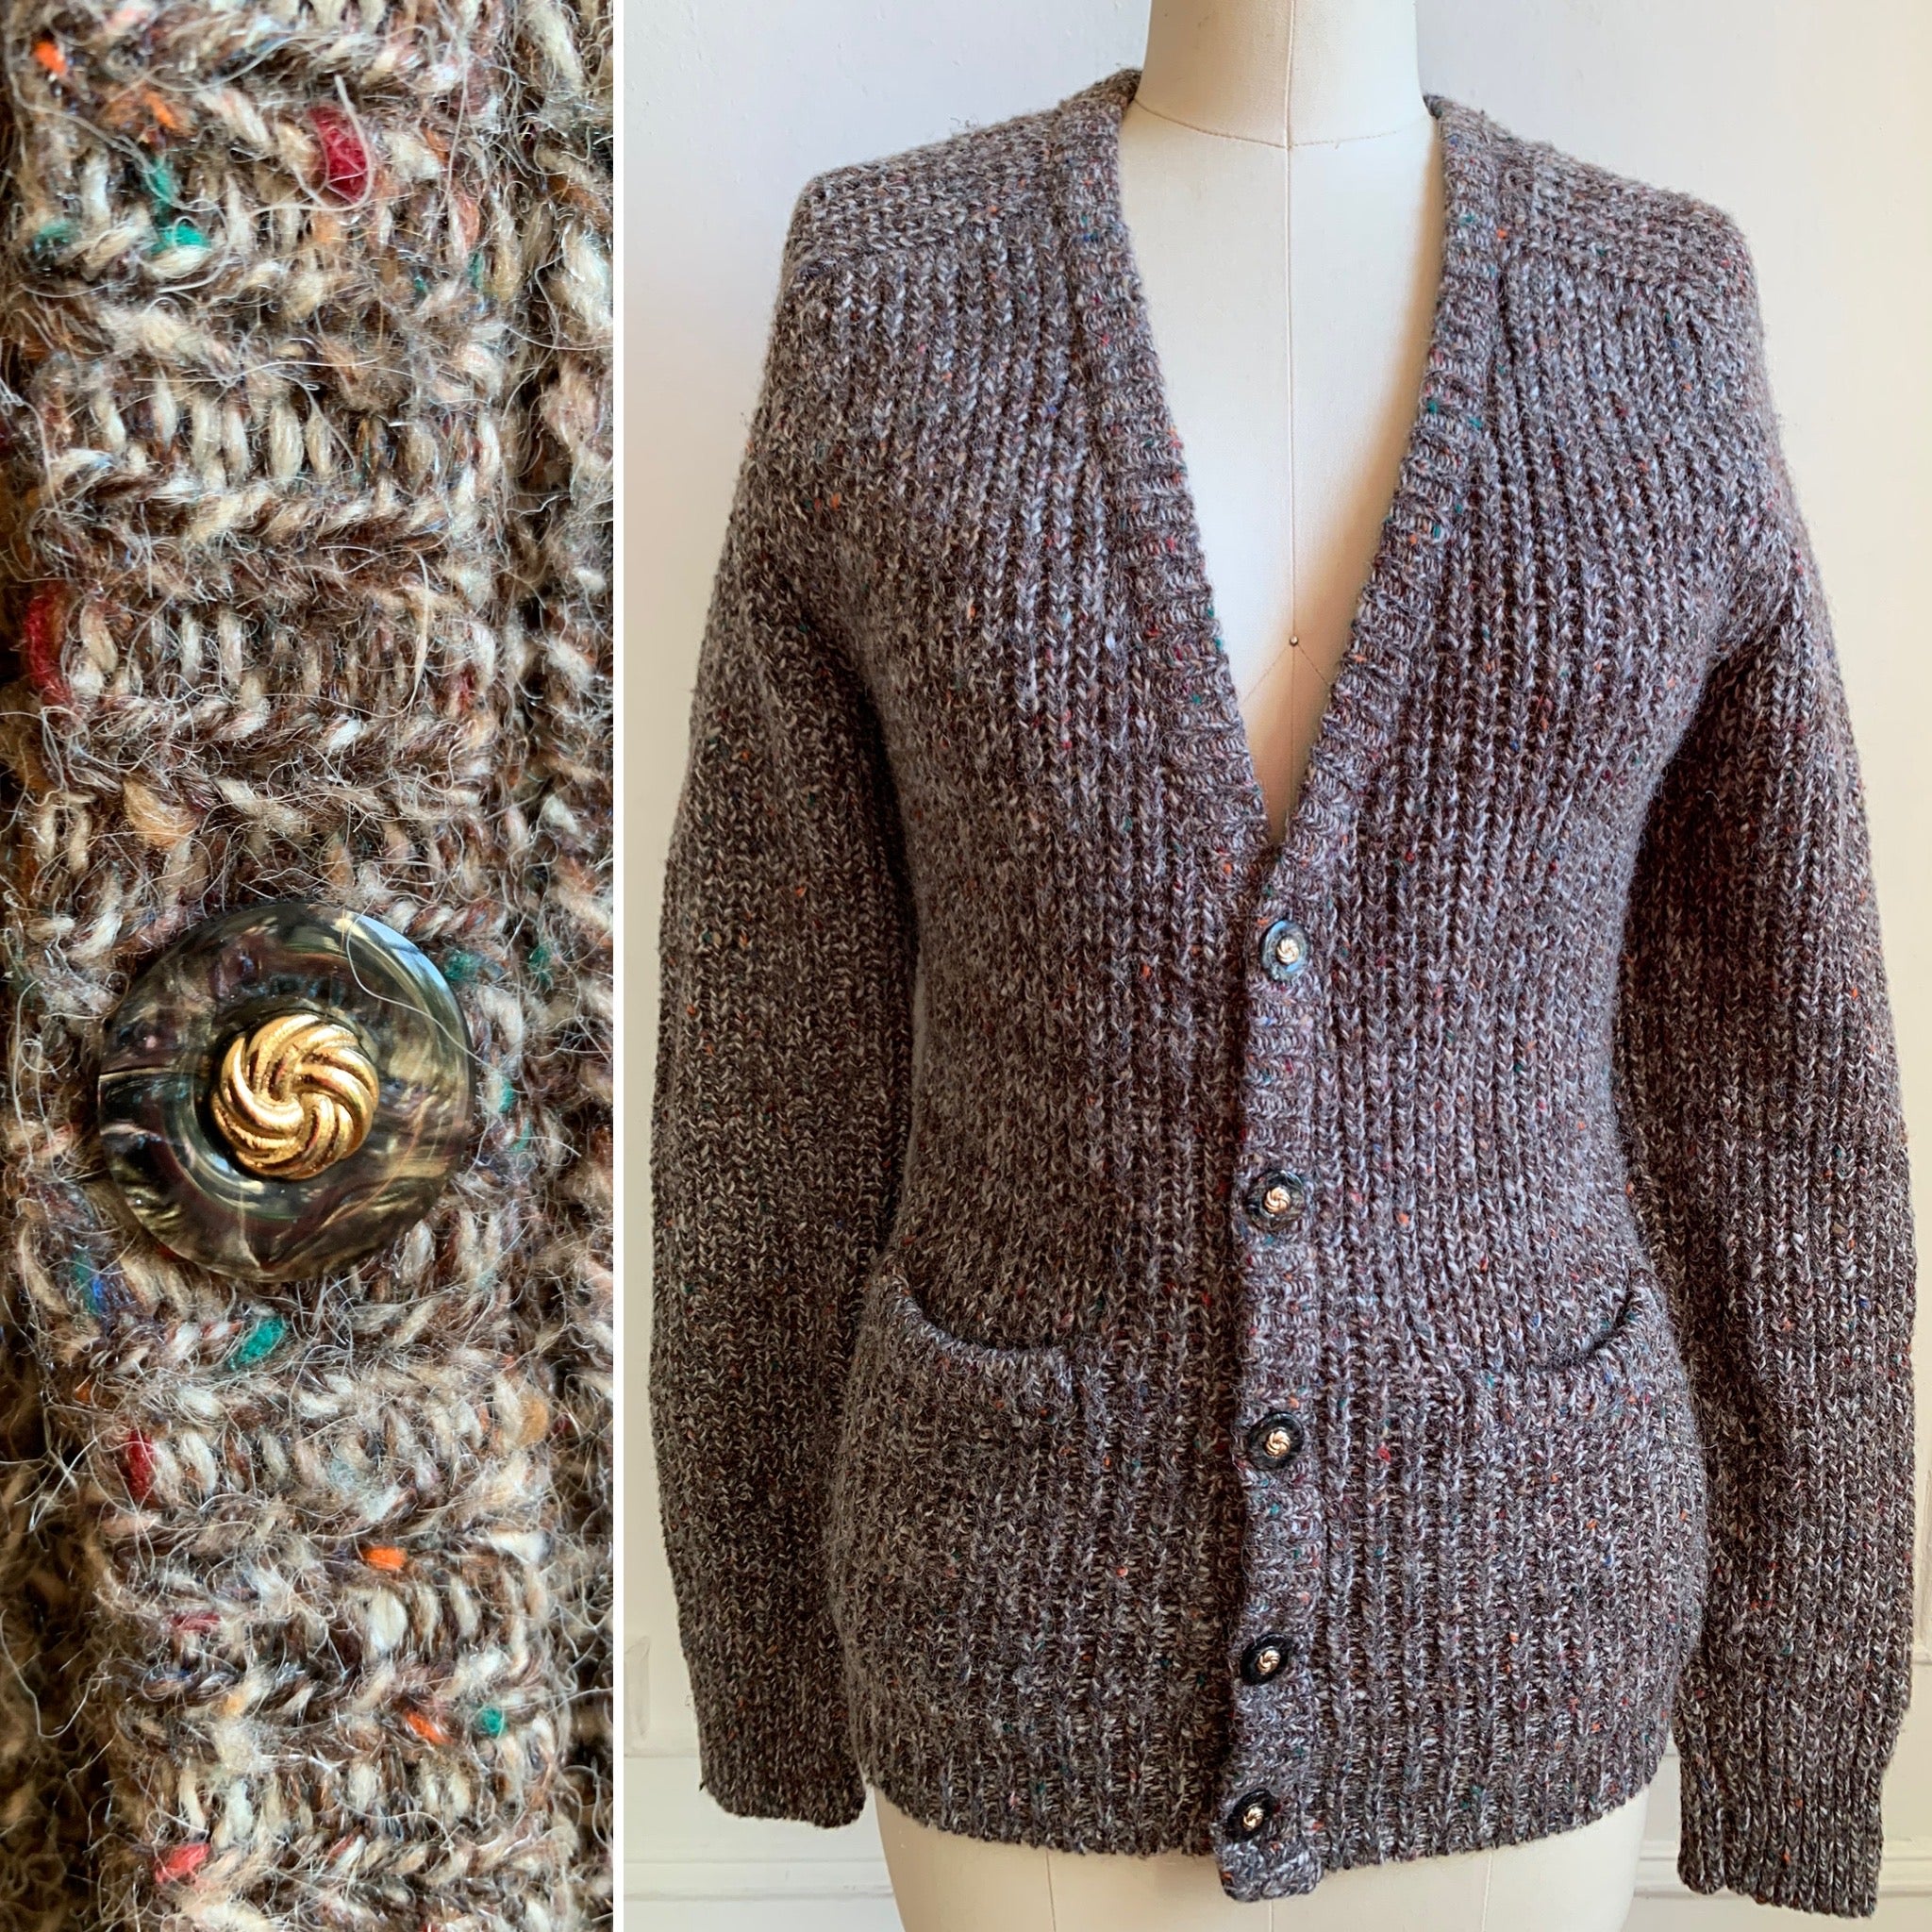 Vintage 80s Brown Speckled Knit Cardigan Sweater – It's Not About